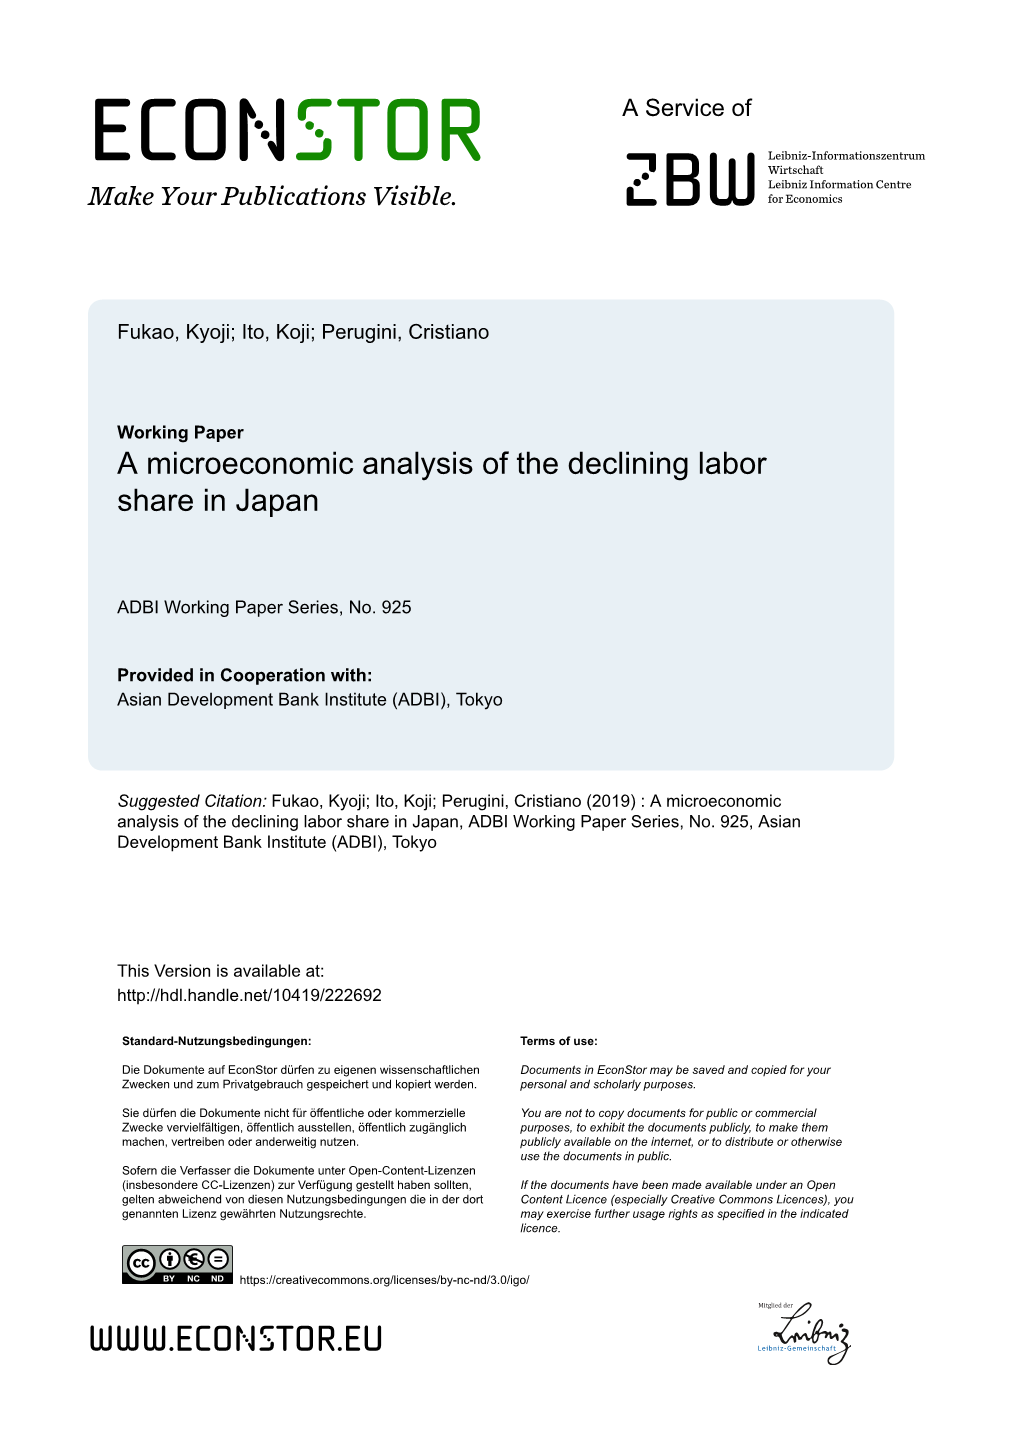 A Microeconomic Analysis of the Declining Labor Share in Japan